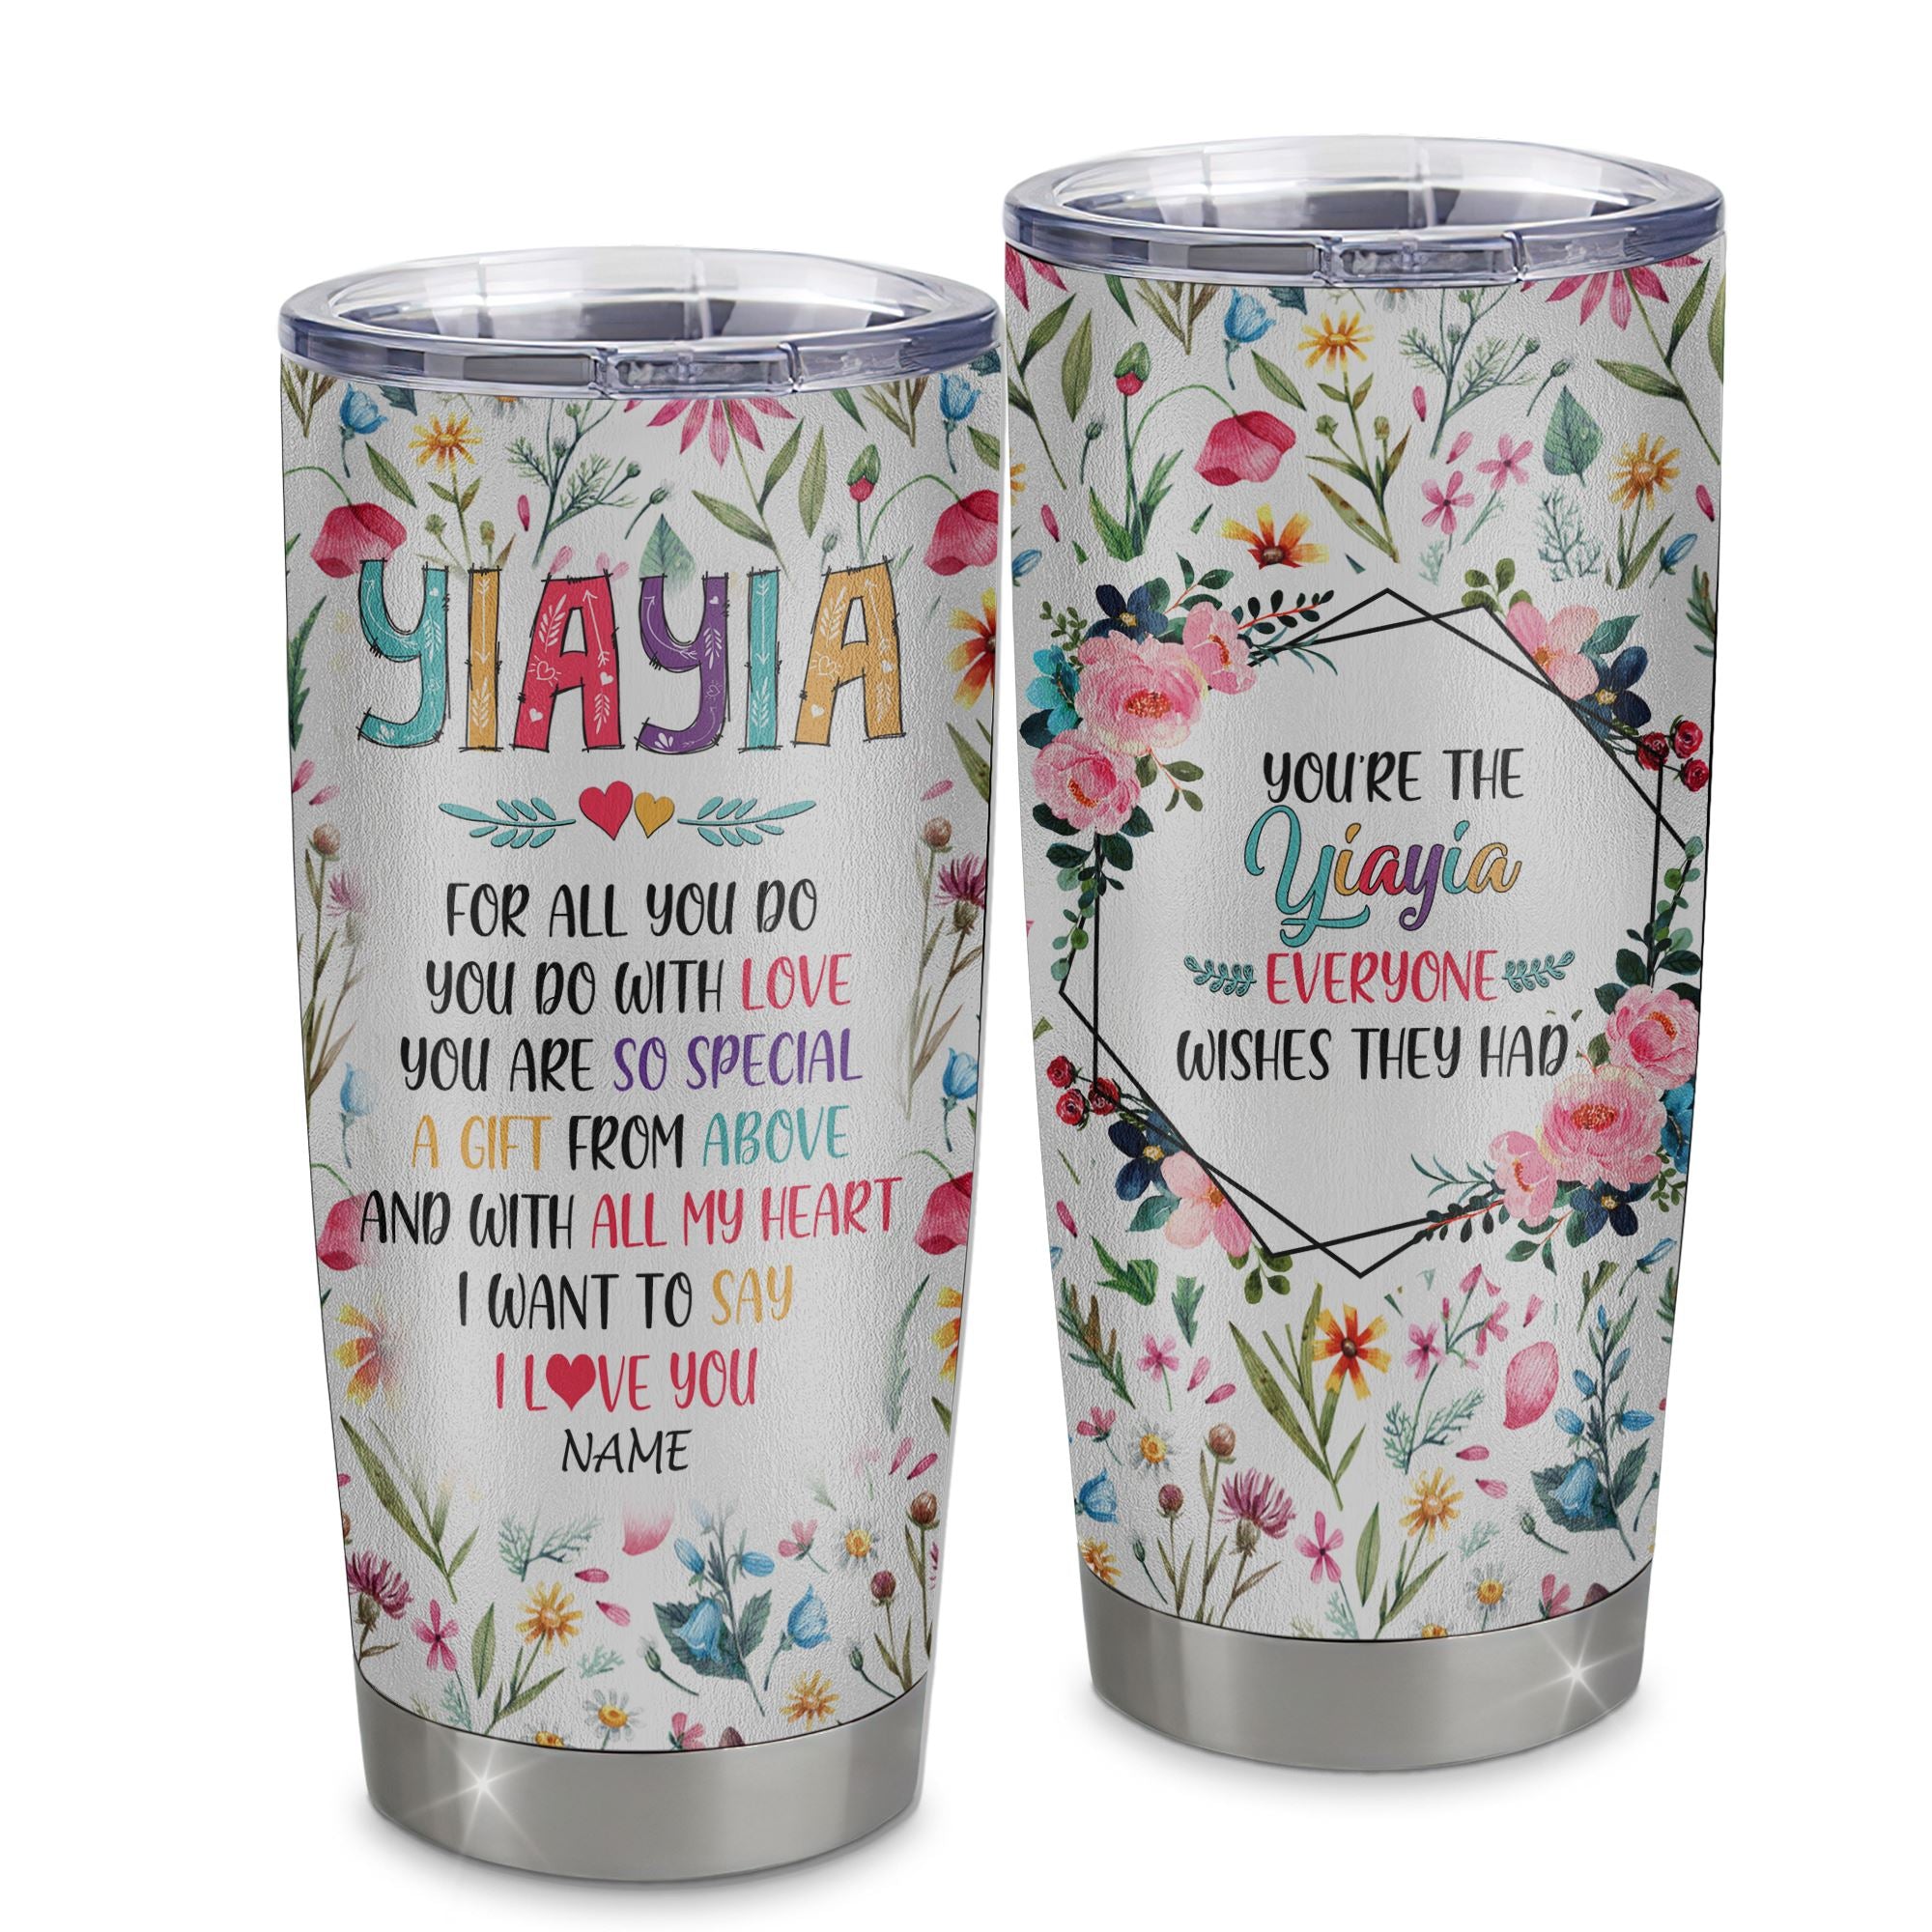 Personalized_Yiayia_From_Granddaughter_Grandson_Grandchildren_Stainless_Steel_Tumbler_Cup_You_Are_So_Special_I_Love_You_Yiayia_Mothers_Day_Birthday_Christmas_Travel_Mug_Tumbler_mockup-1.jpg